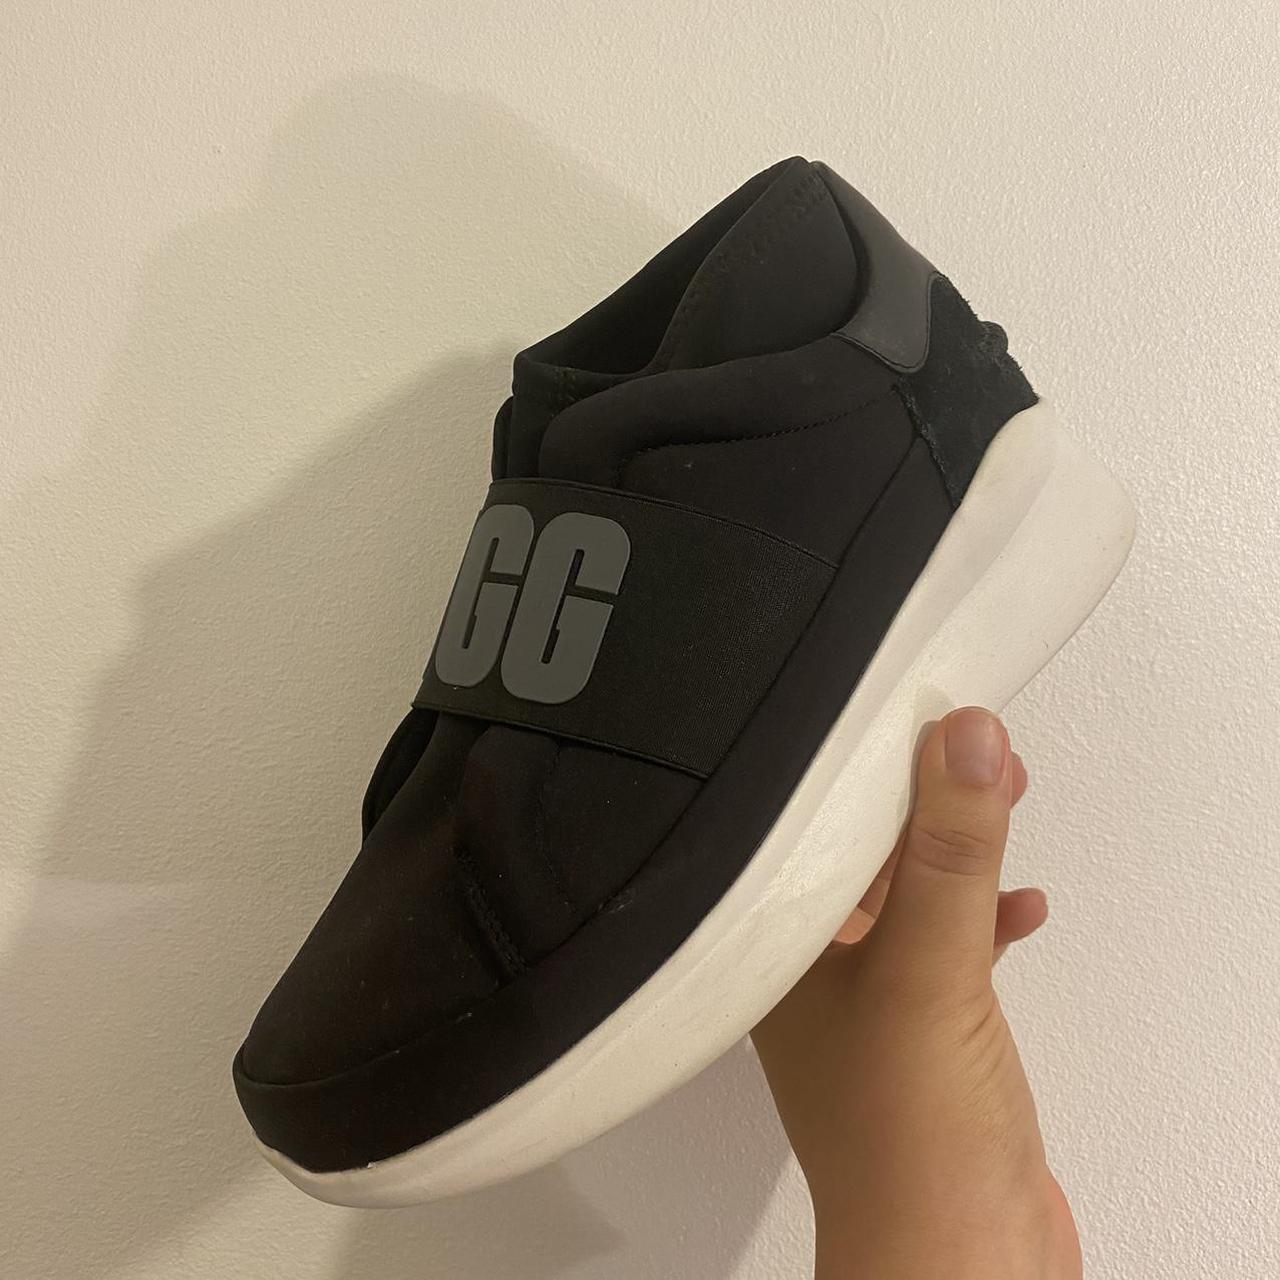 Product Image 3 - Black Ugg Slip-on Trainers 🖤
Very